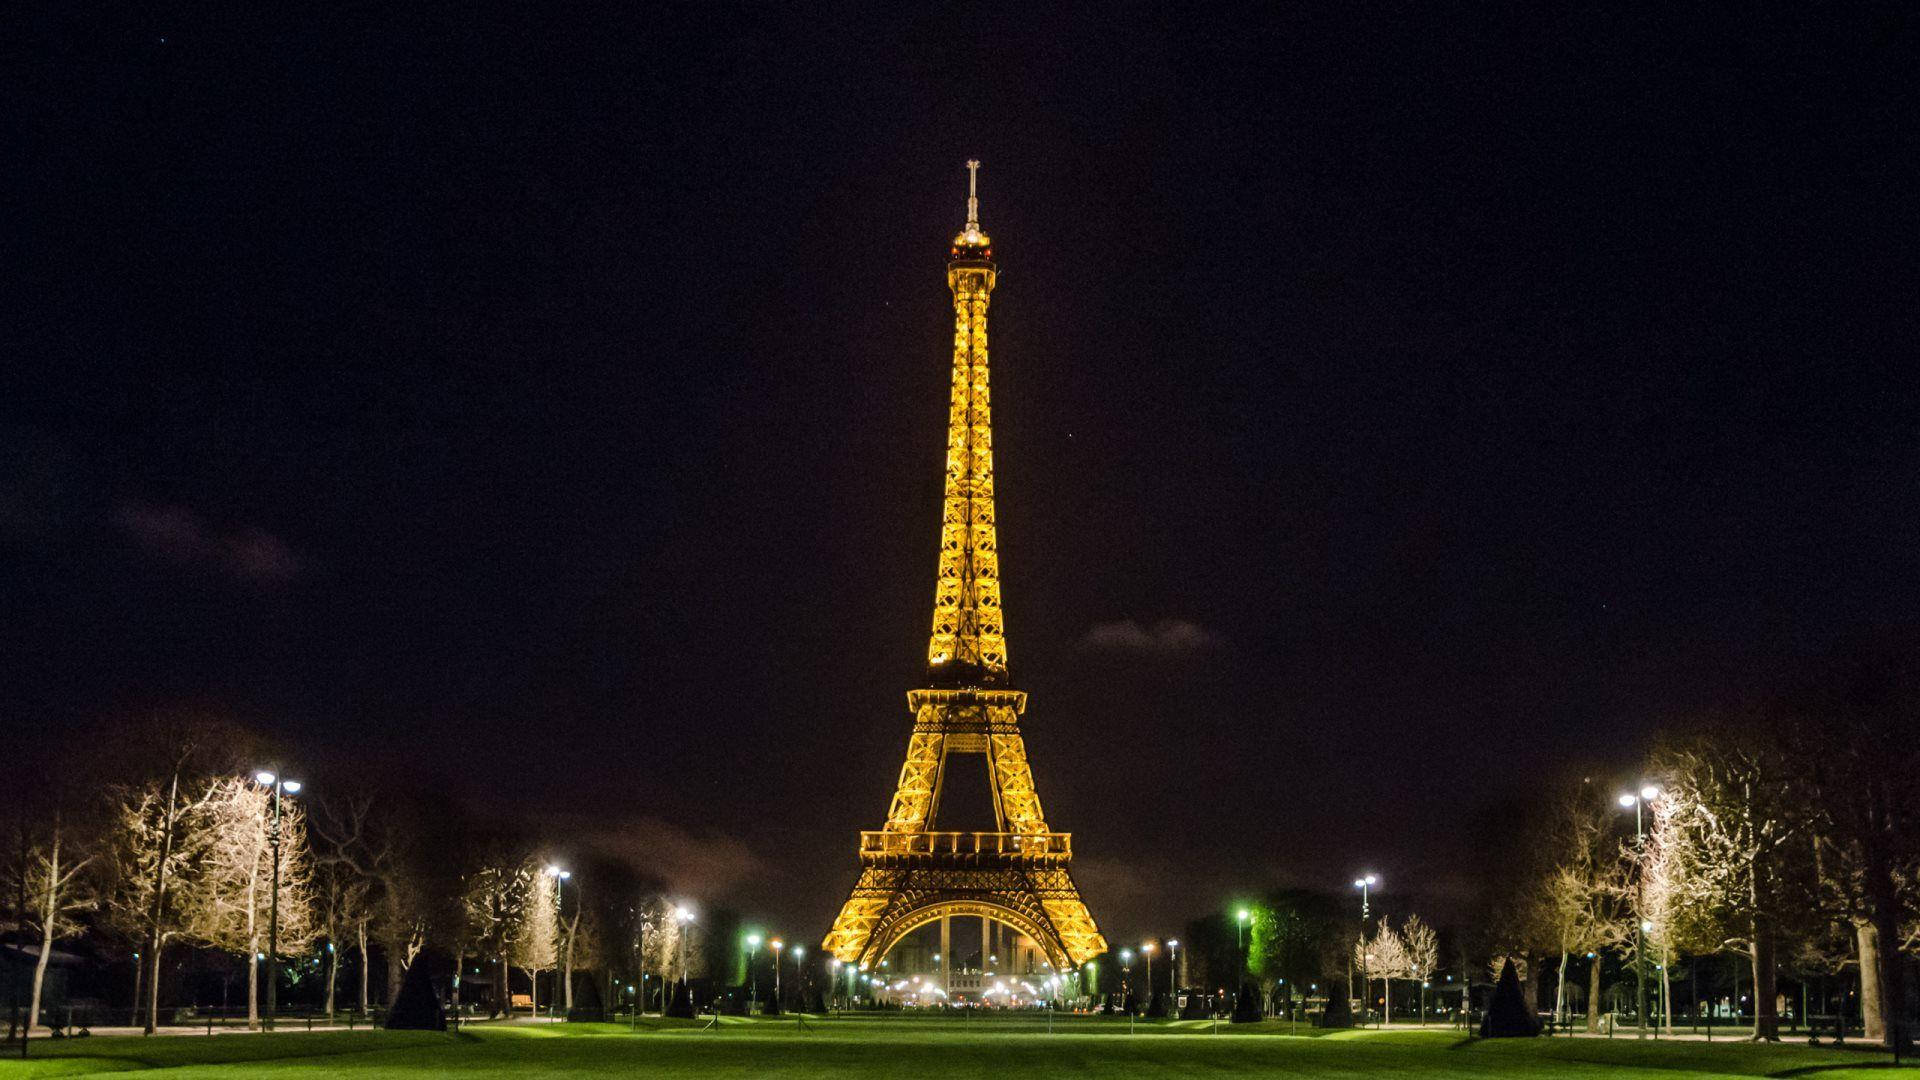 “The Iconic Eiffel Tower in Paris, France” Wallpaper